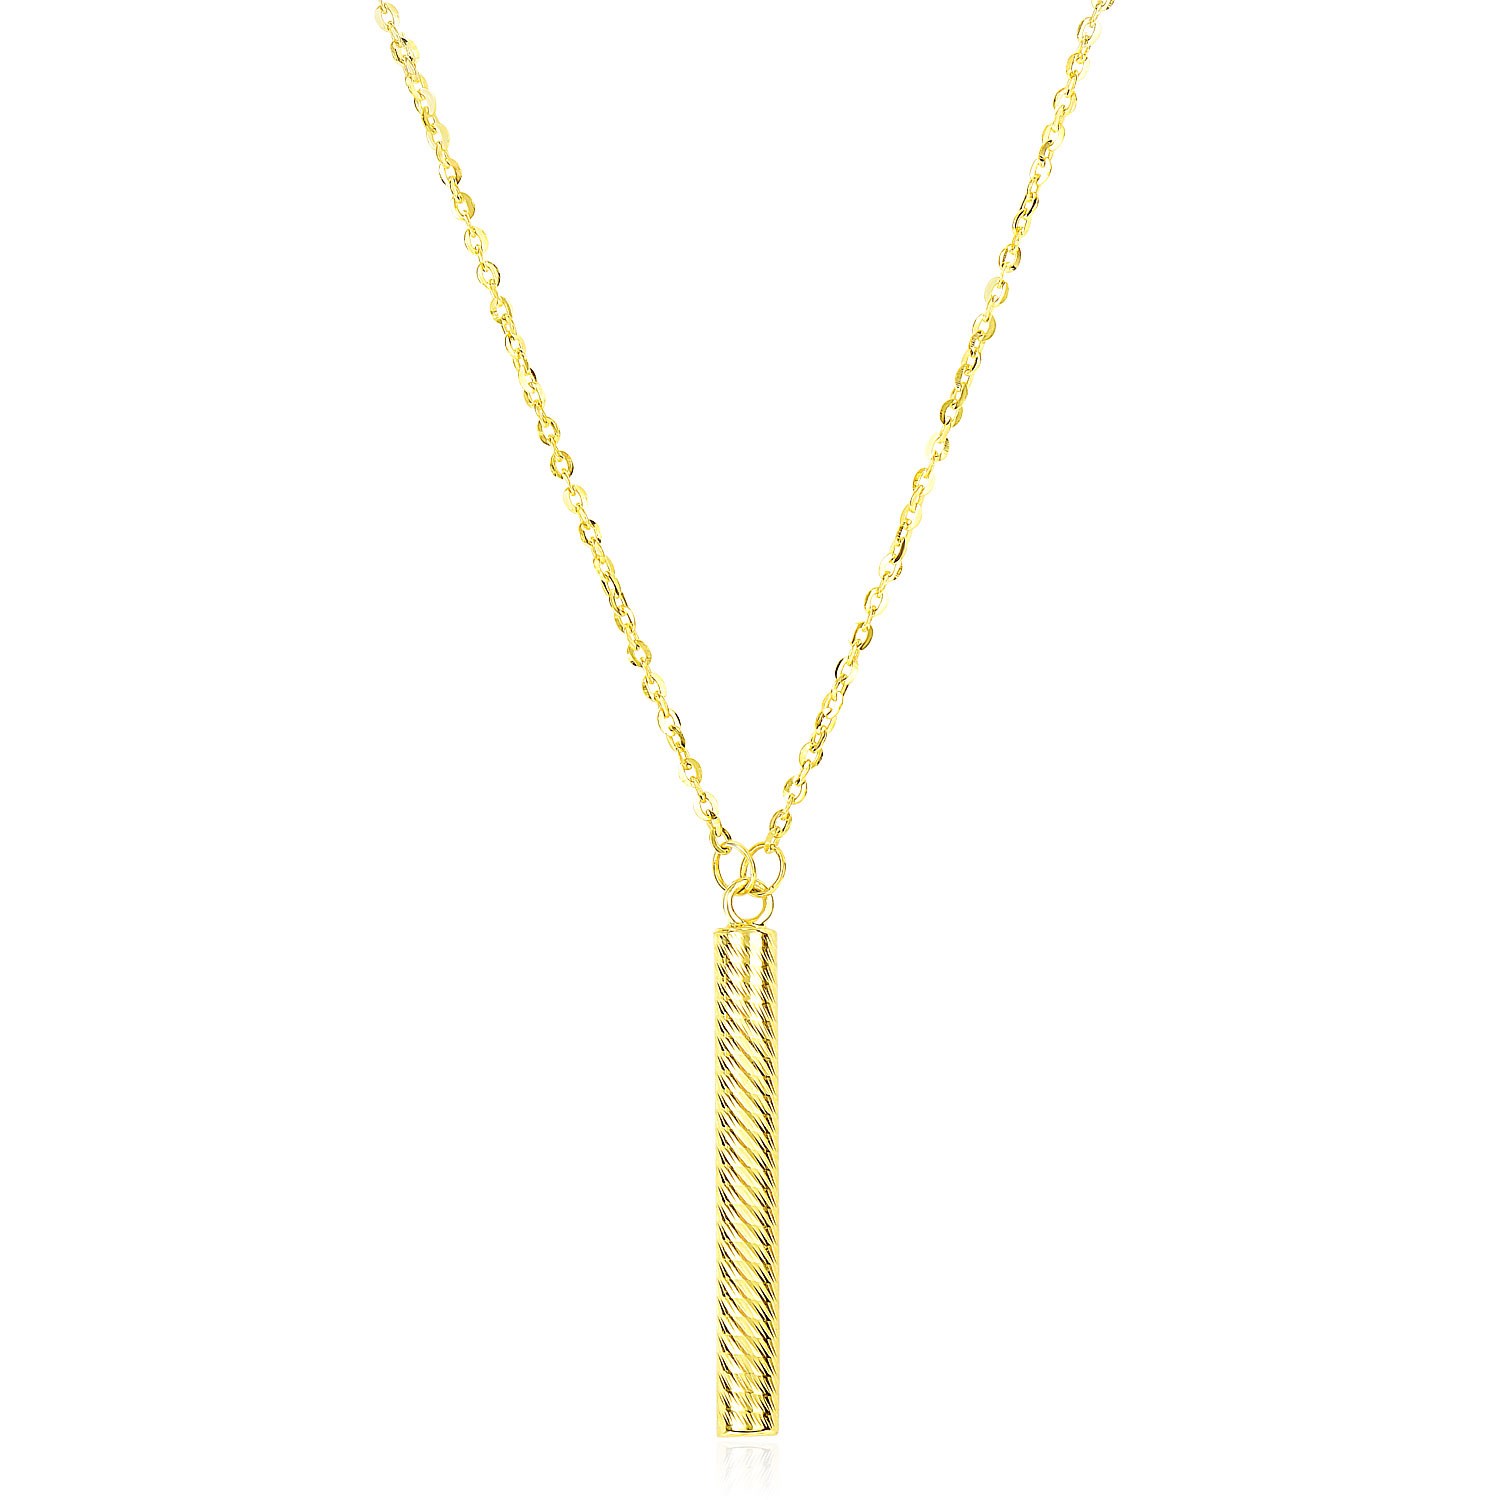 14k Yellow Gold Textured Cylinder Pendant Chain Necklace